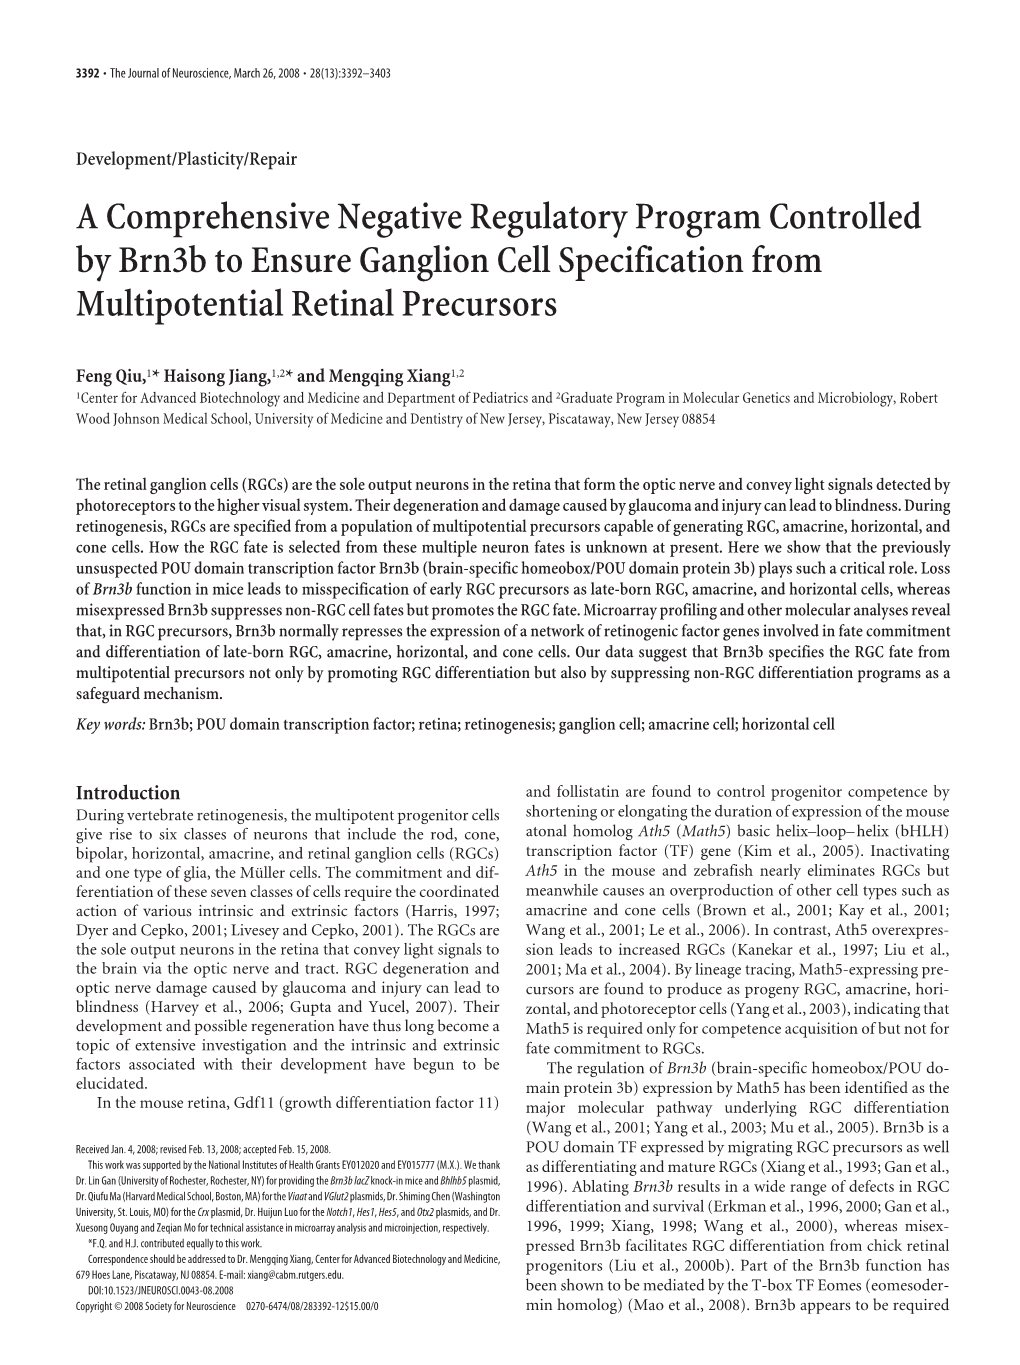 A Comprehensive Negative Regulatory Program Controlled by Brn3b to Ensure Ganglion Cell Specification from Multipotential Retinal Precursors